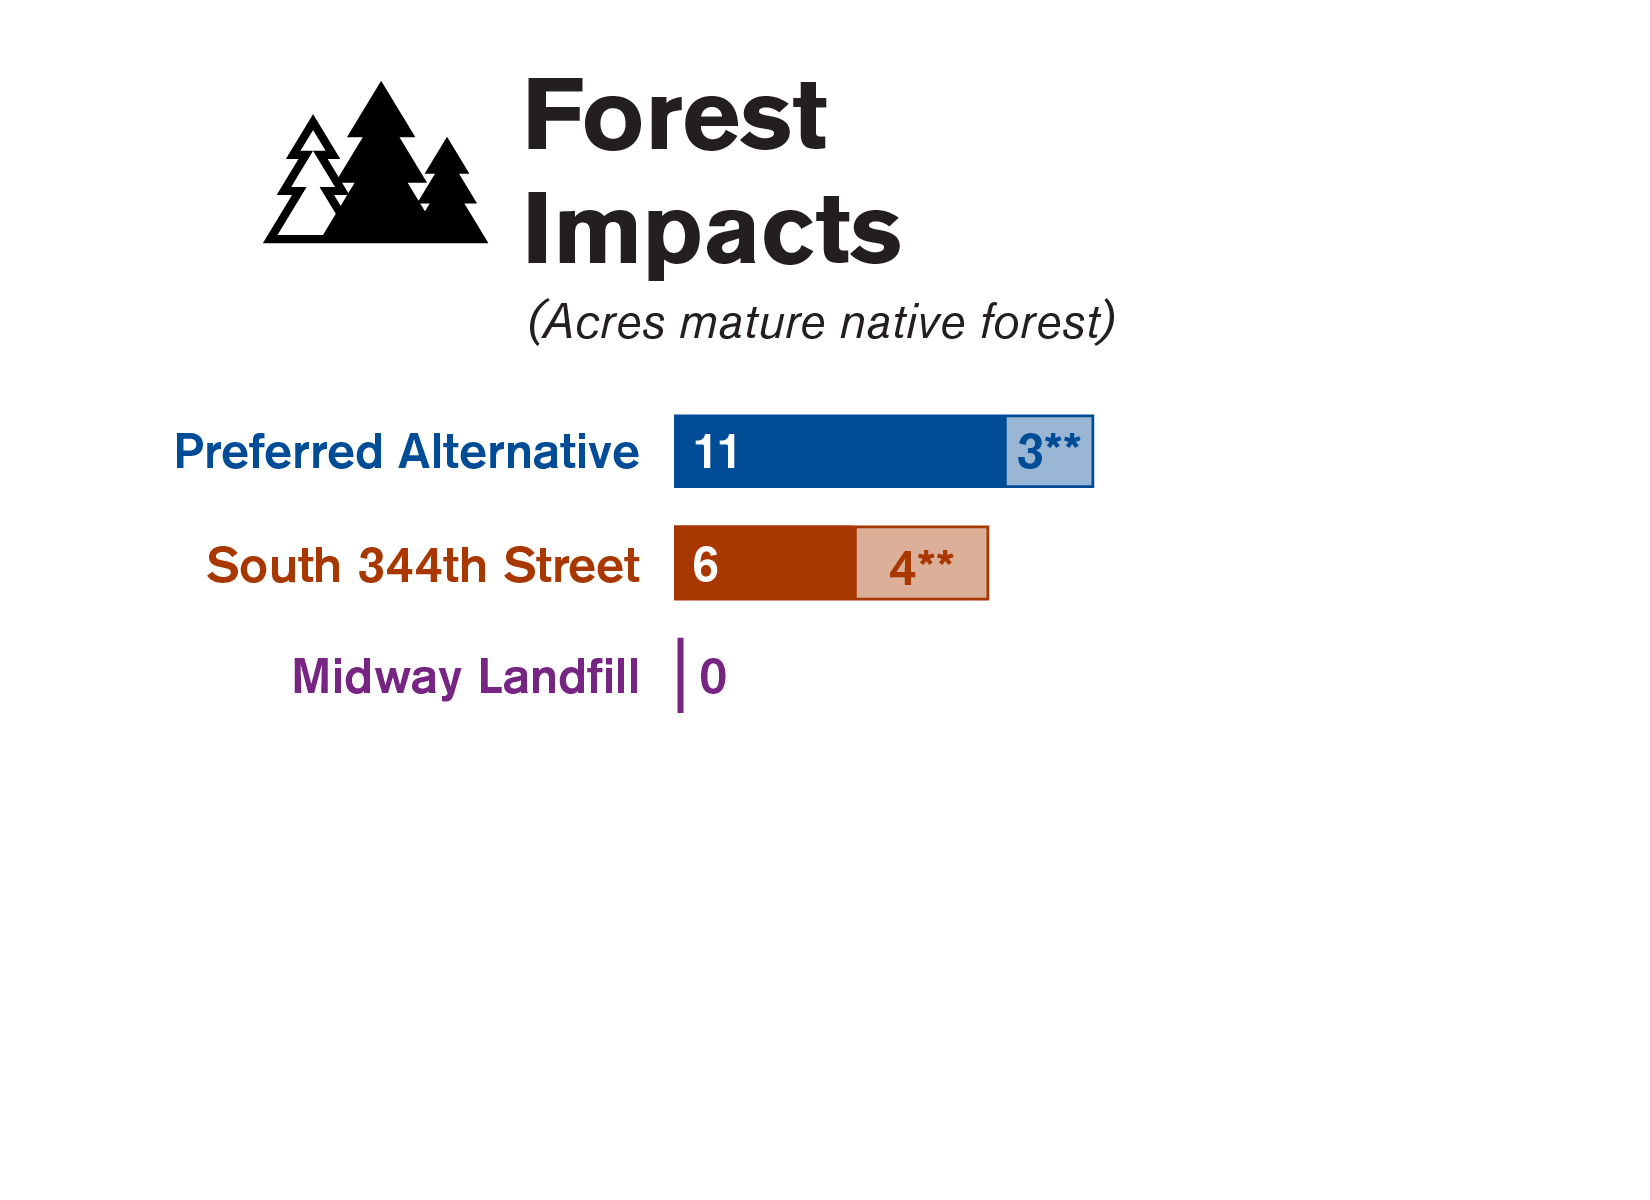 Graphic comparing the forest impacts of each of the three site alternatives studied in the Draft EIS.